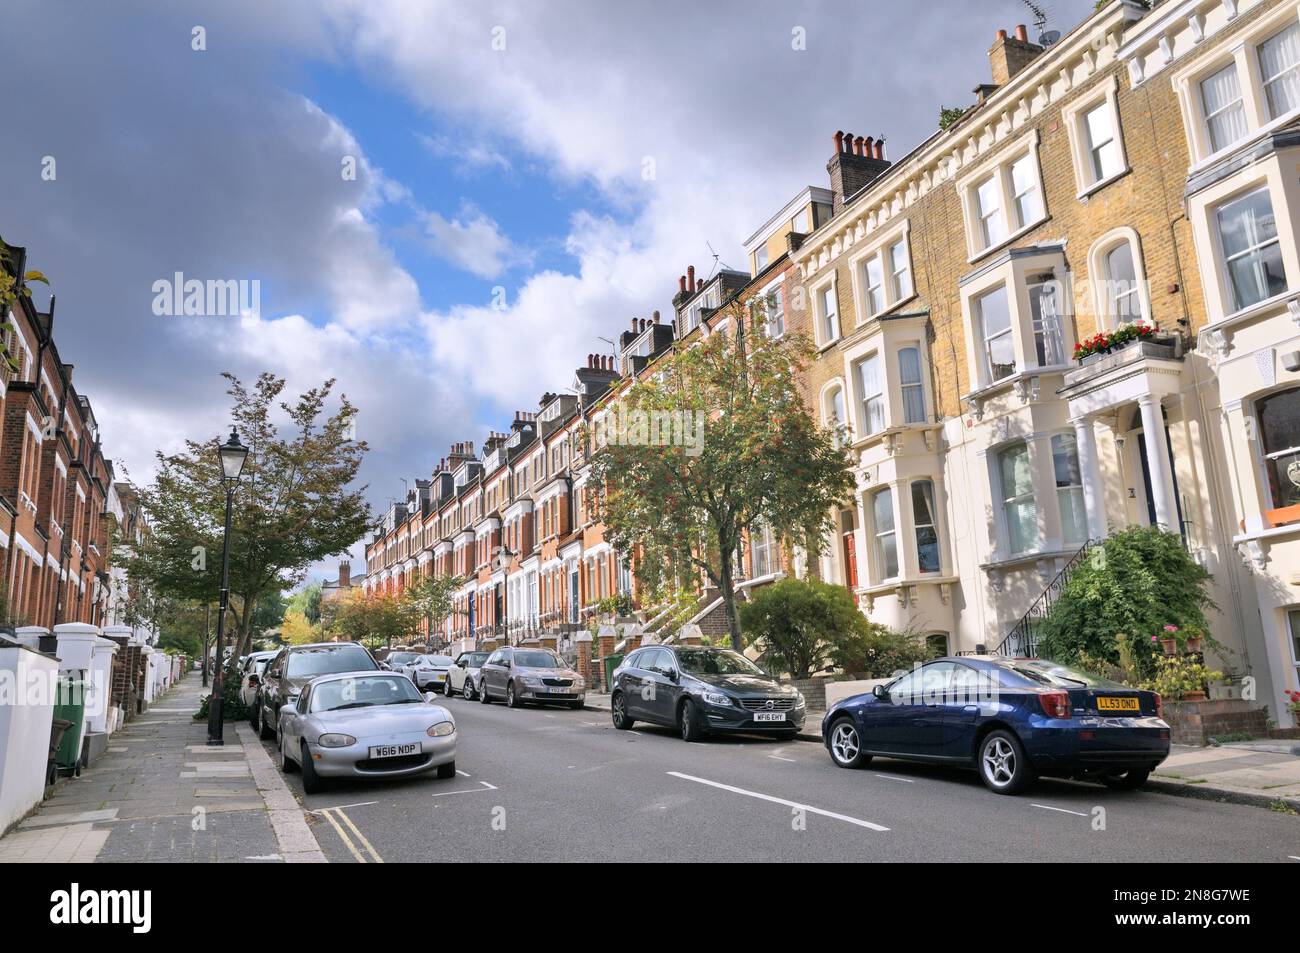 Victorian terraced houses line a residential street with rowan trees in the affluent leafy neighbourhood of Hampstead Village, North London England UK Stock Photo